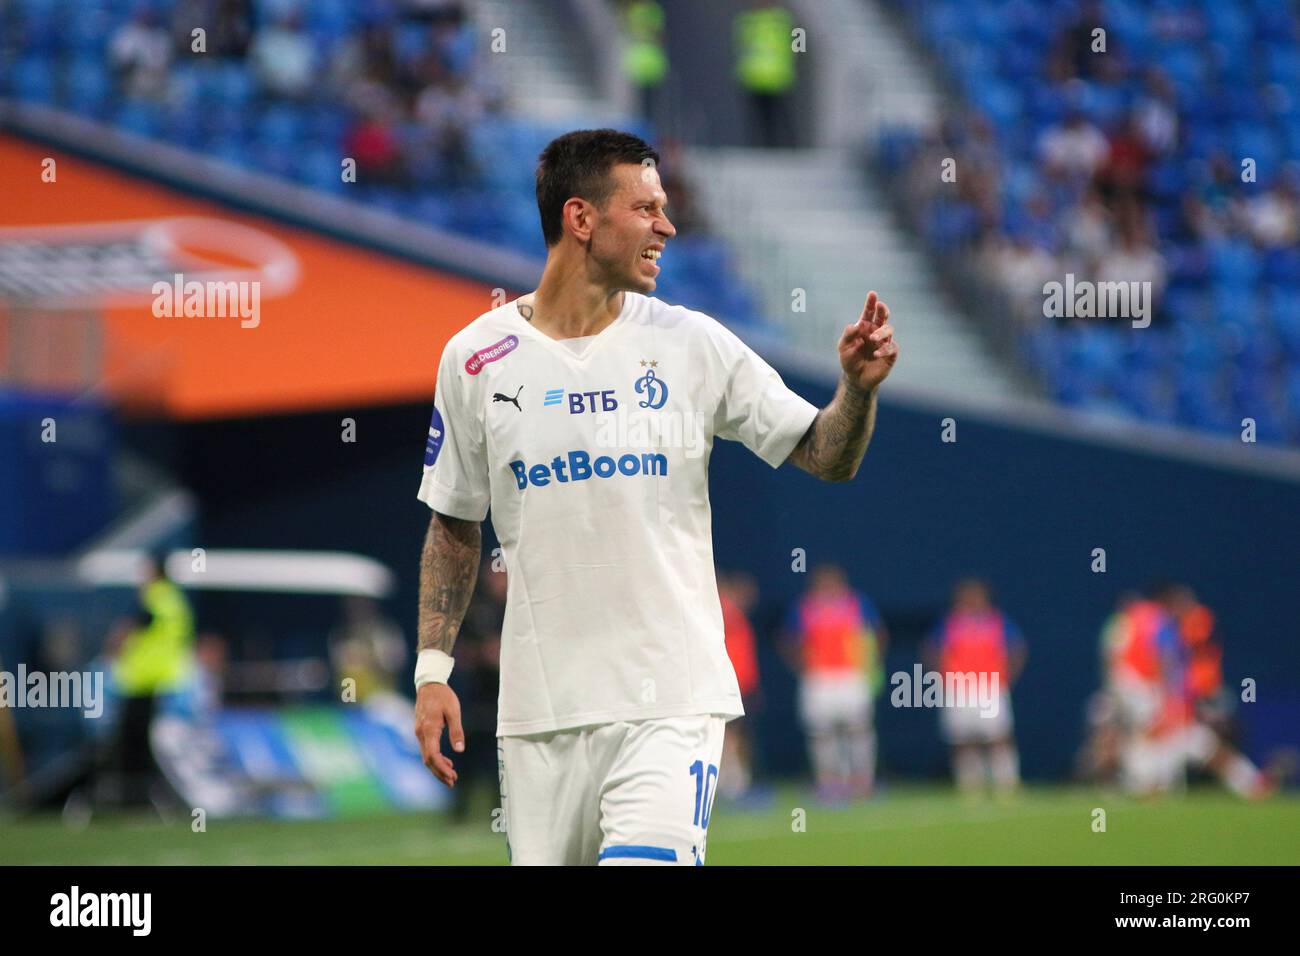 Saint Petersburg, Russia. 06th Aug, 2023. Fedor Smolov (10) of Dynamo seen during the Russian Premier League football match between Zenit Saint Petersburg and Dynamo Moscow at Gazprom Arena. Zenit 2:3 Dynamo. (Photo by Maksim Konstantinov/SOPA Images/Sipa USA) Credit: Sipa USA/Alamy Live News Stock Photo